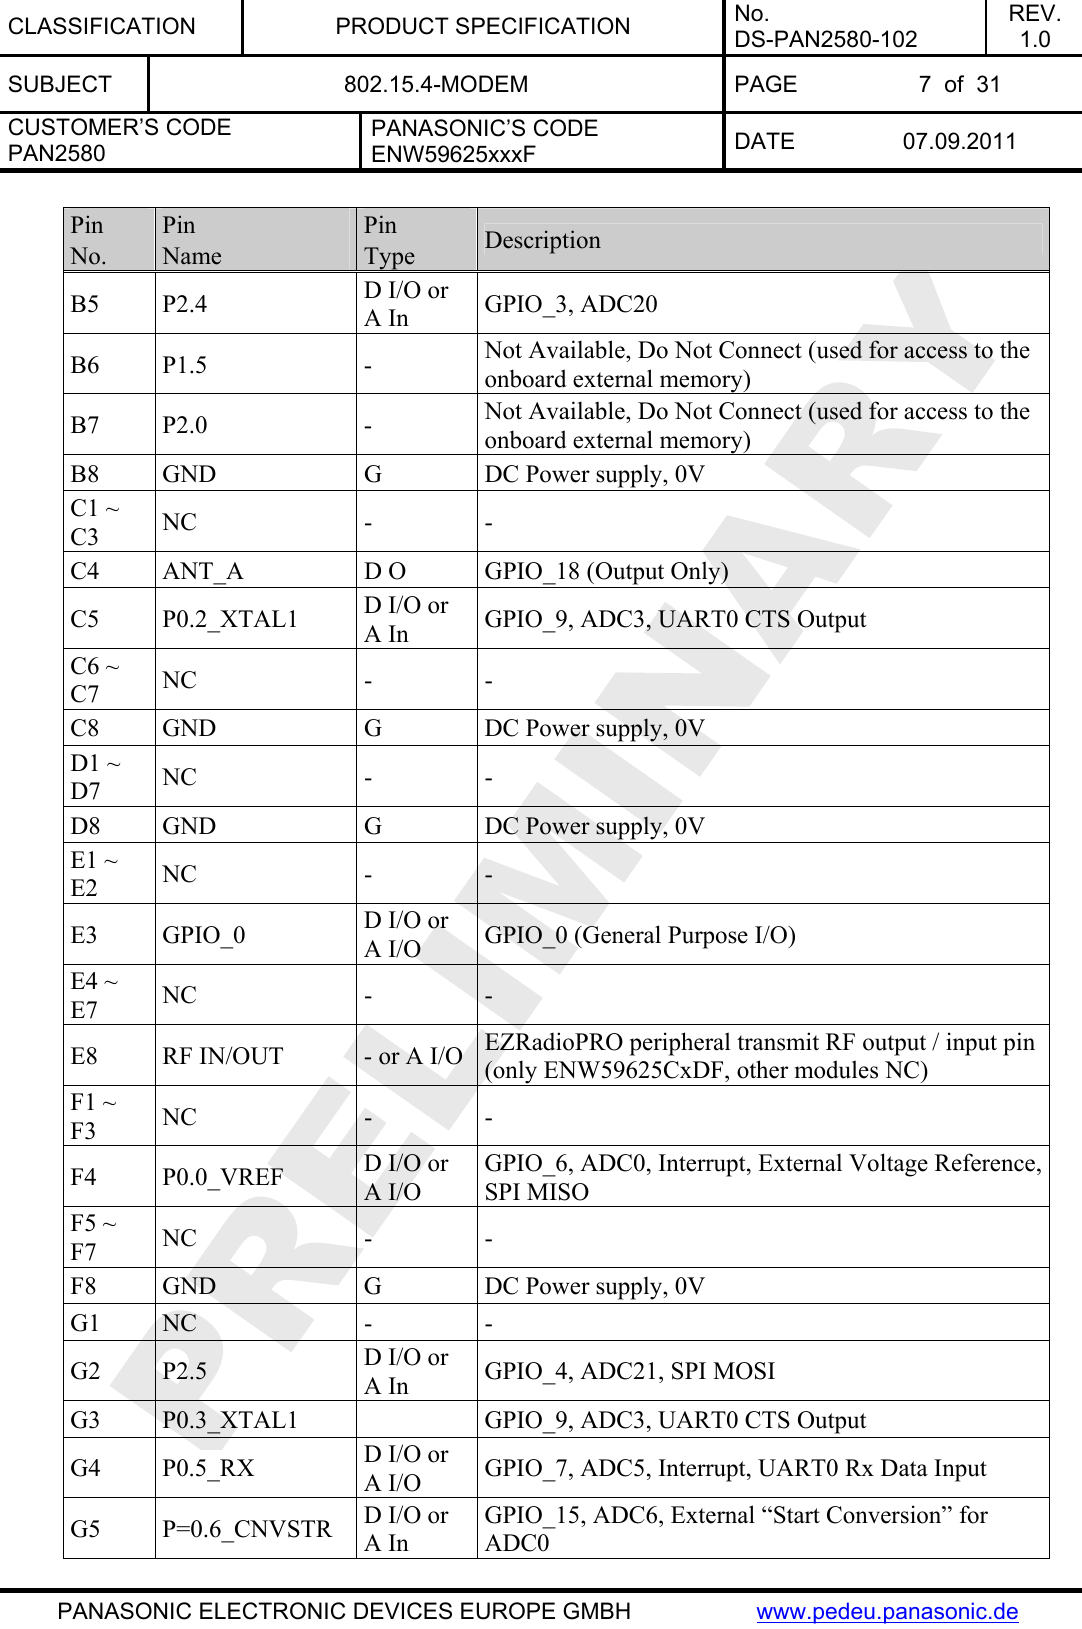 CLASSIFICATION PRODUCT SPECIFICATION No. DS-PAN2580-102 REV. 1.0 SUBJECT  802.15.4-MODEM  PAGE  7  of  31 CUSTOMER’S CODE PAN2580 PANASONIC’S CODE ENW59625xxxF  DATE 07.09.2011   PANASONIC ELECTRONIC DEVICES EUROPE GMBH  www.pedeu.panasonic.de  Pin No. Pin Name Pin Type  Description B5 P2.4  D I/O or A In  GPIO_3, ADC20 B6 P1.5  -  Not Available, Do Not Connect (used for access to the onboard external memory) B7 P2.0  -  Not Available, Do Not Connect (used for access to the onboard external memory) B8  GND  G  DC Power supply, 0V C1 ~ C3  NC - - C4  ANT_A  D O  GPIO_18 (Output Only) C5 P0.2_XTAL1 D I/O or A In  GPIO_9, ADC3, UART0 CTS Output C6 ~ C7  NC - - C8  GND  G  DC Power supply, 0V D1 ~ D7  NC - - D8  GND  G  DC Power supply, 0V E1 ~ E2  NC - - E3 GPIO_0  D I/O or A I/O  GPIO_0 (General Purpose I/O) E4 ~ E7  NC - - E8  RF IN/OUT  - or A I/O  EZRadioPRO peripheral transmit RF output / input pin (only ENW59625CxDF, other modules NC) F1 ~ F3  NC - - F4 P0.0_VREF  D I/O or A I/O GPIO_6, ADC0, Interrupt, External Voltage Reference, SPI MISO F5 ~ F7  NC - - F8  GND  G  DC Power supply, 0V G1 NC  -  - G2 P2.5  D I/O or A In  GPIO_4, ADC21, SPI MOSI G3  P0.3_XTAL1    GPIO_9, ADC3, UART0 CTS Output G4 P0.5_RX  D I/O or A I/O  GPIO_7, ADC5, Interrupt, UART0 Rx Data Input G5 P=0.6_CNVSTR D I/O or A In GPIO_15, ADC6, External “Start Conversion” for ADC0 